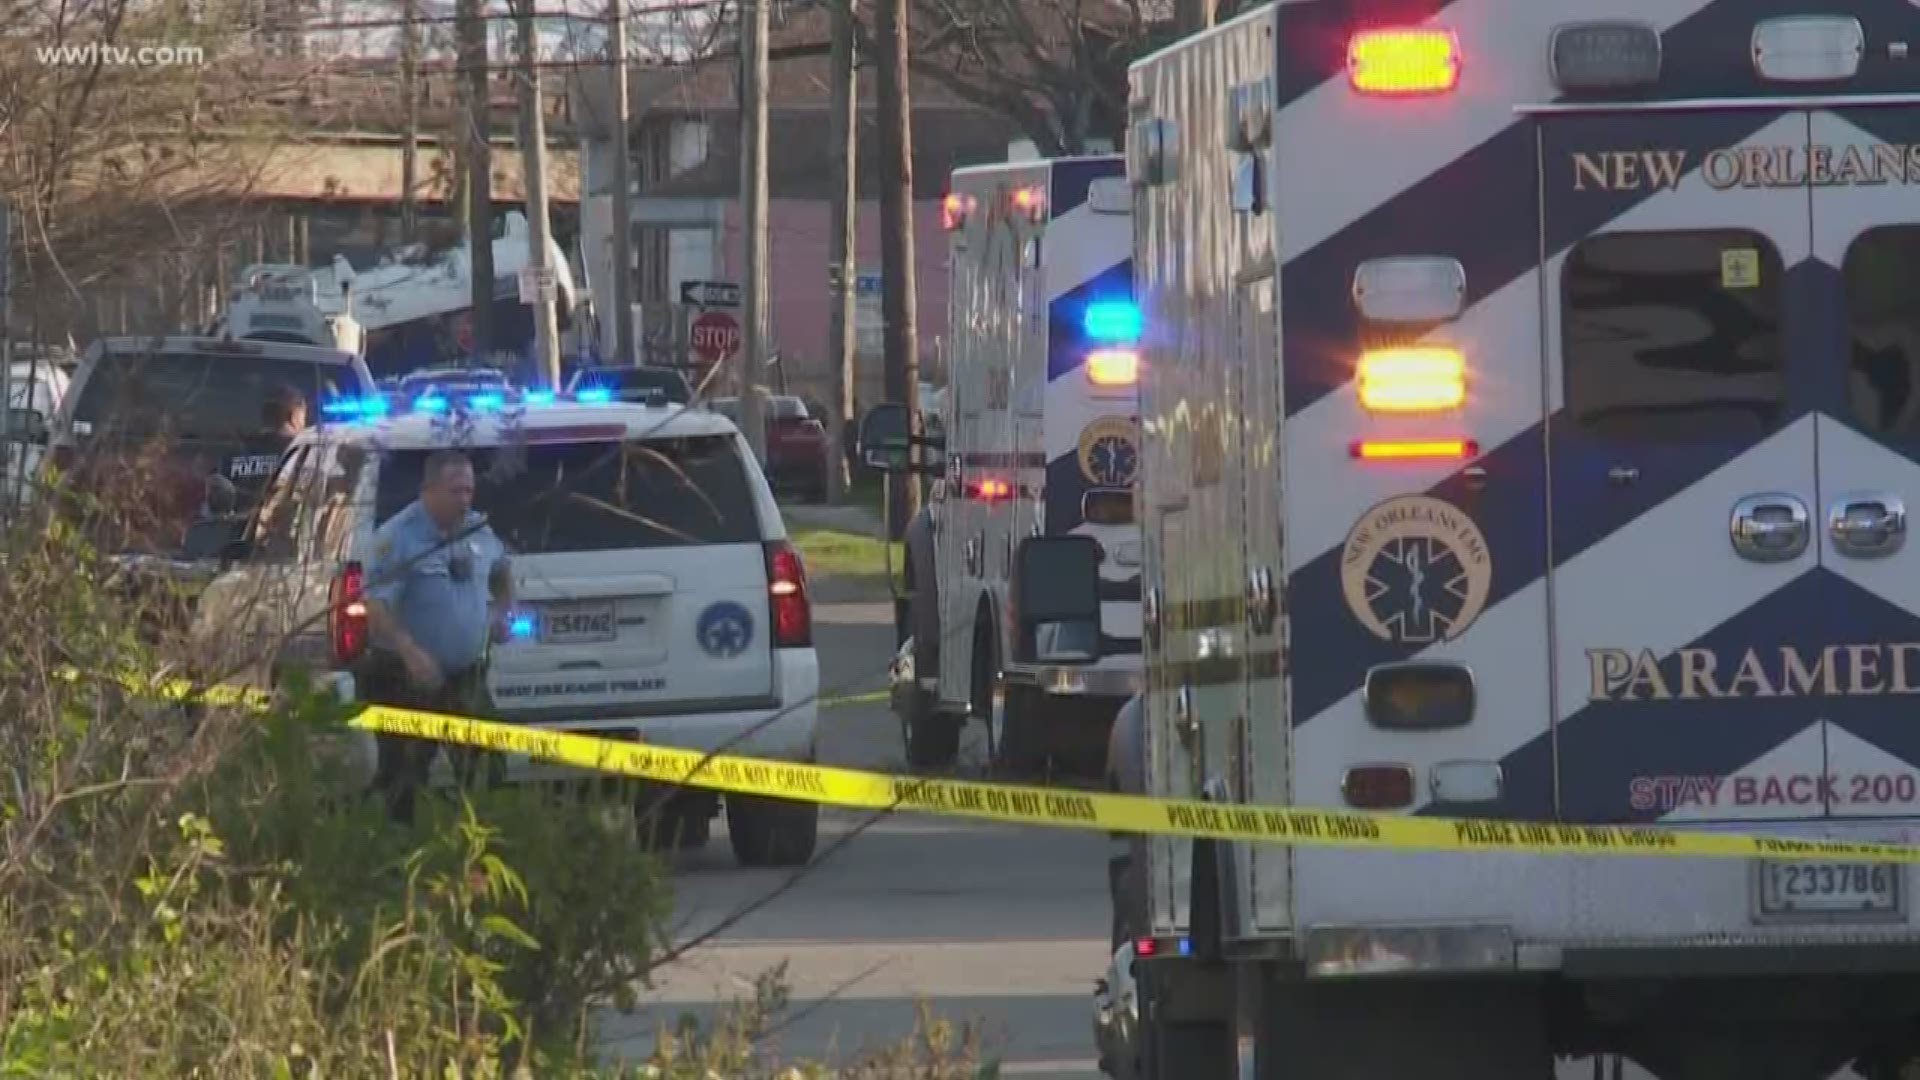 A neighbor tells WWLTV's Meghan Kee that one of the victims was shot in the jaw.